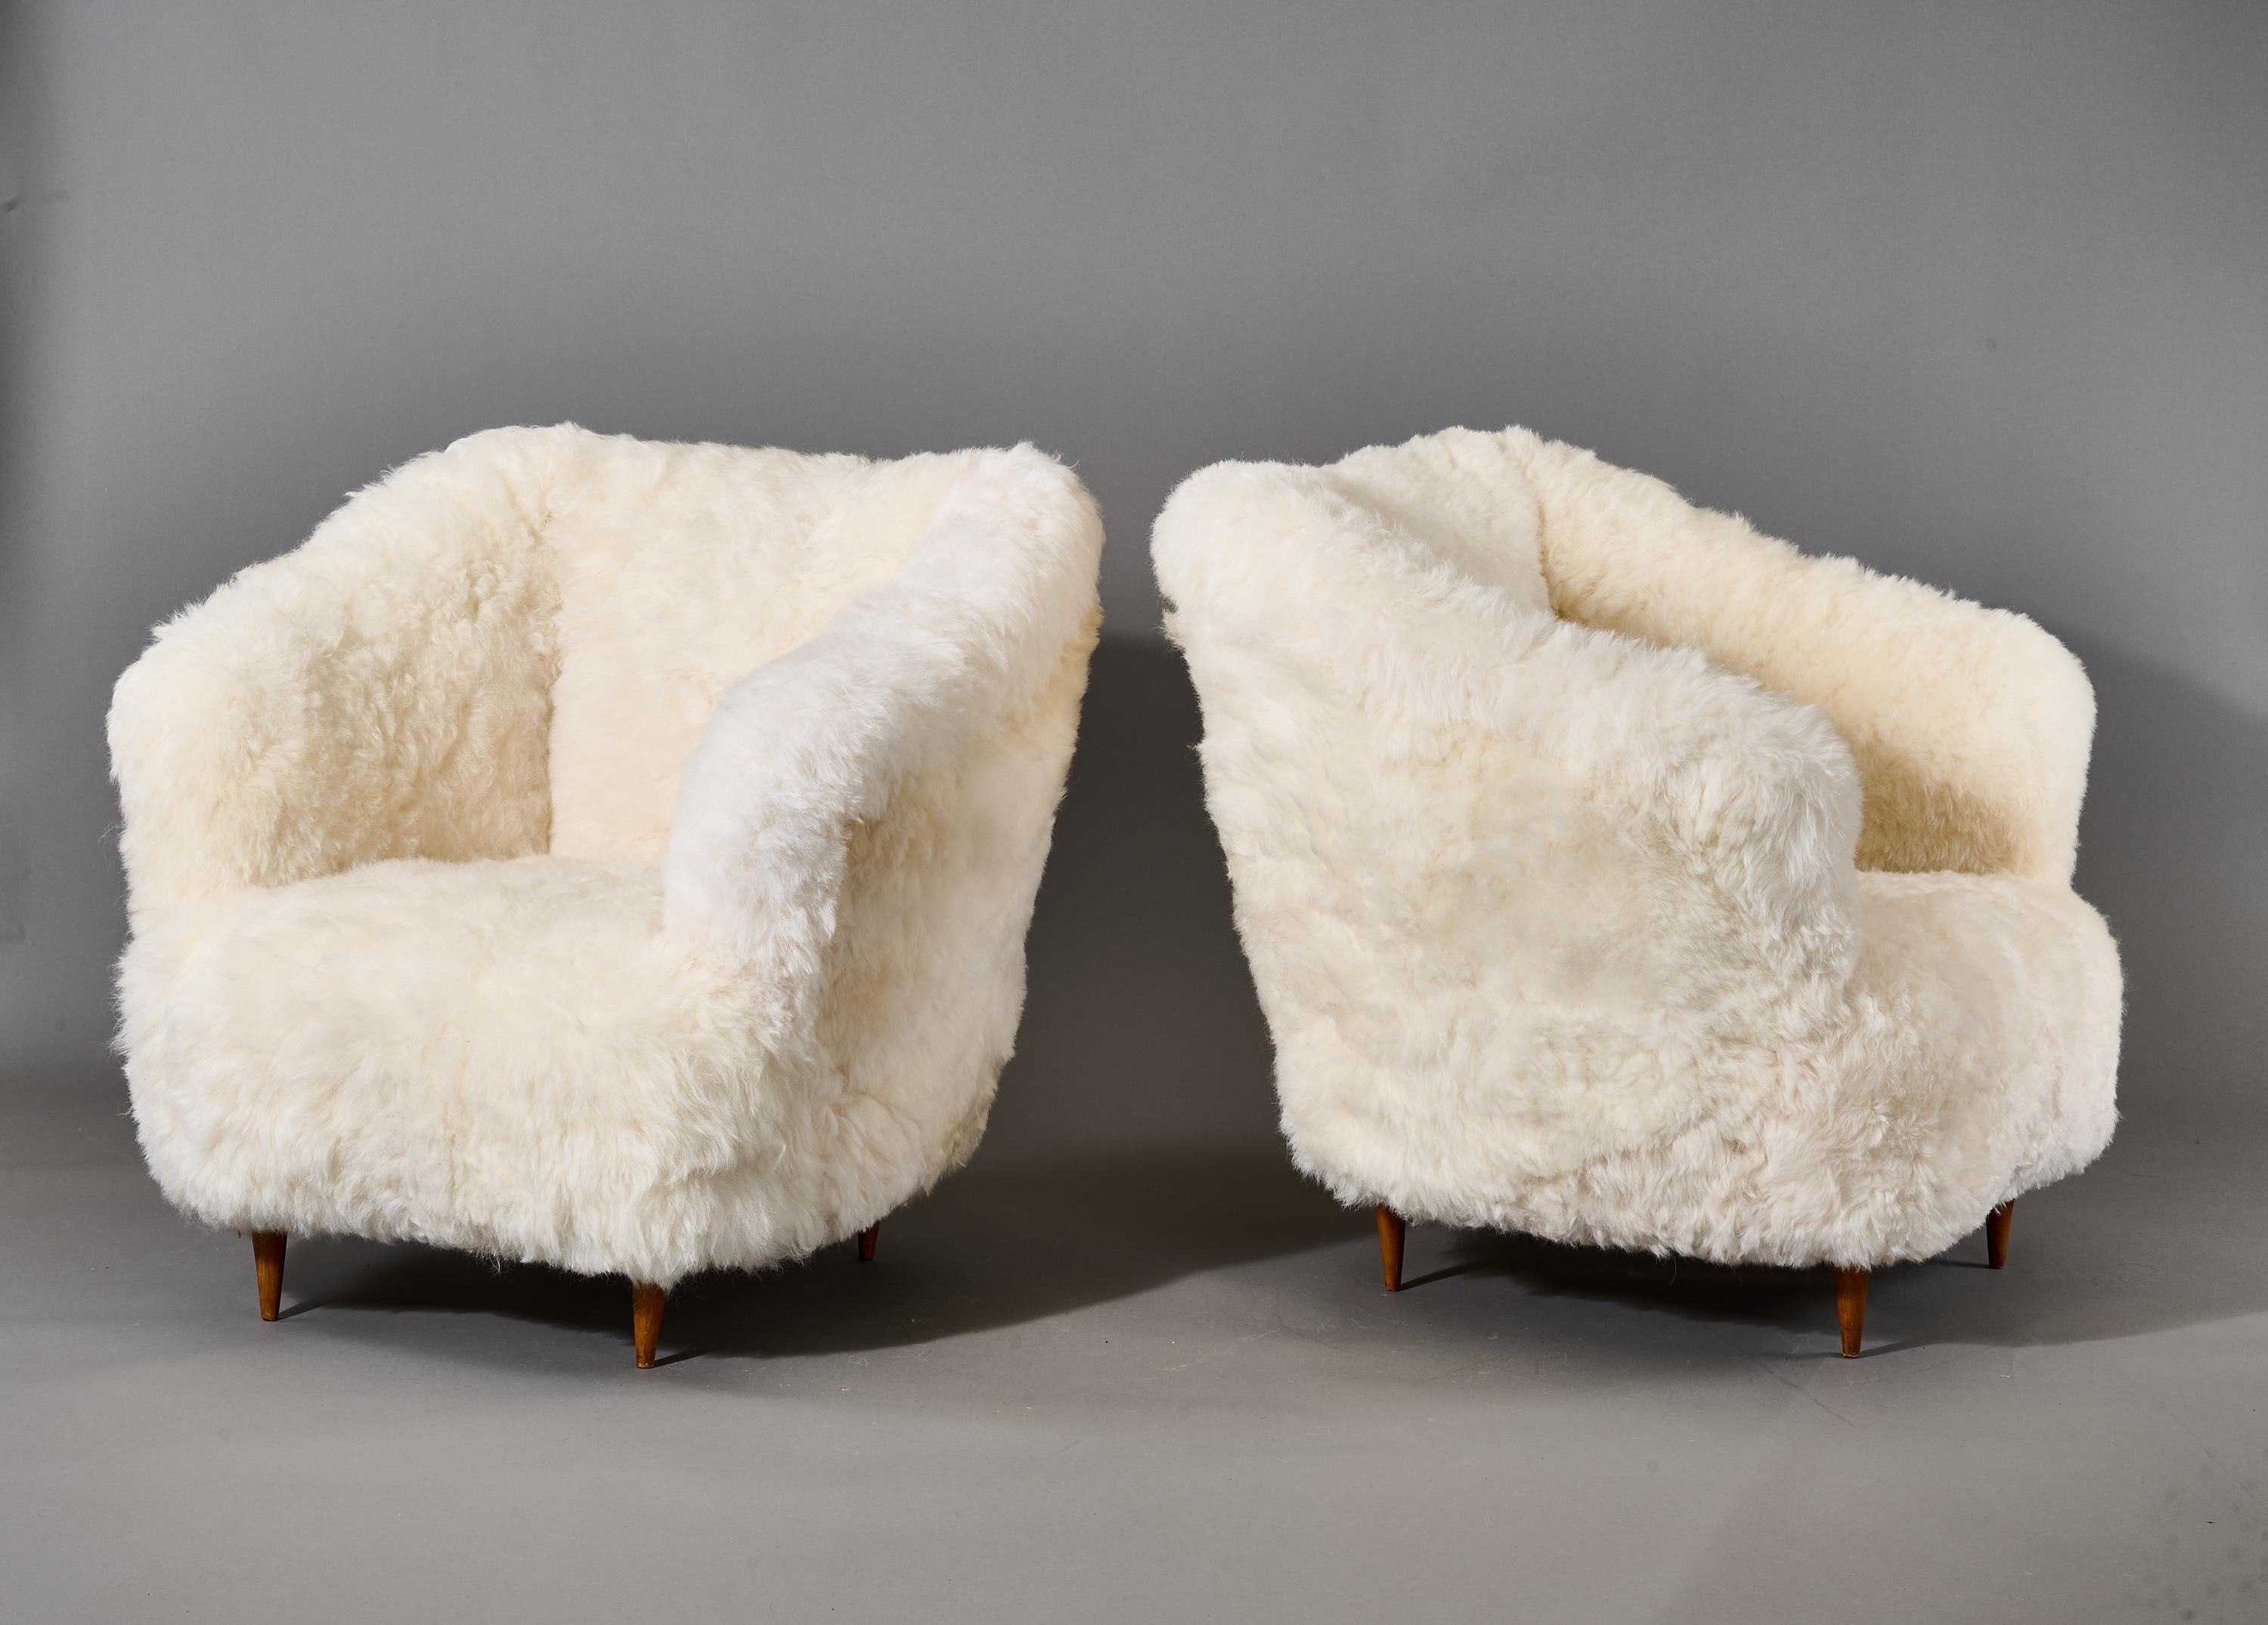 Gio Ponti: Armchairs in White Sheepskin, Italy 1950s In Good Condition For Sale In New York, NY